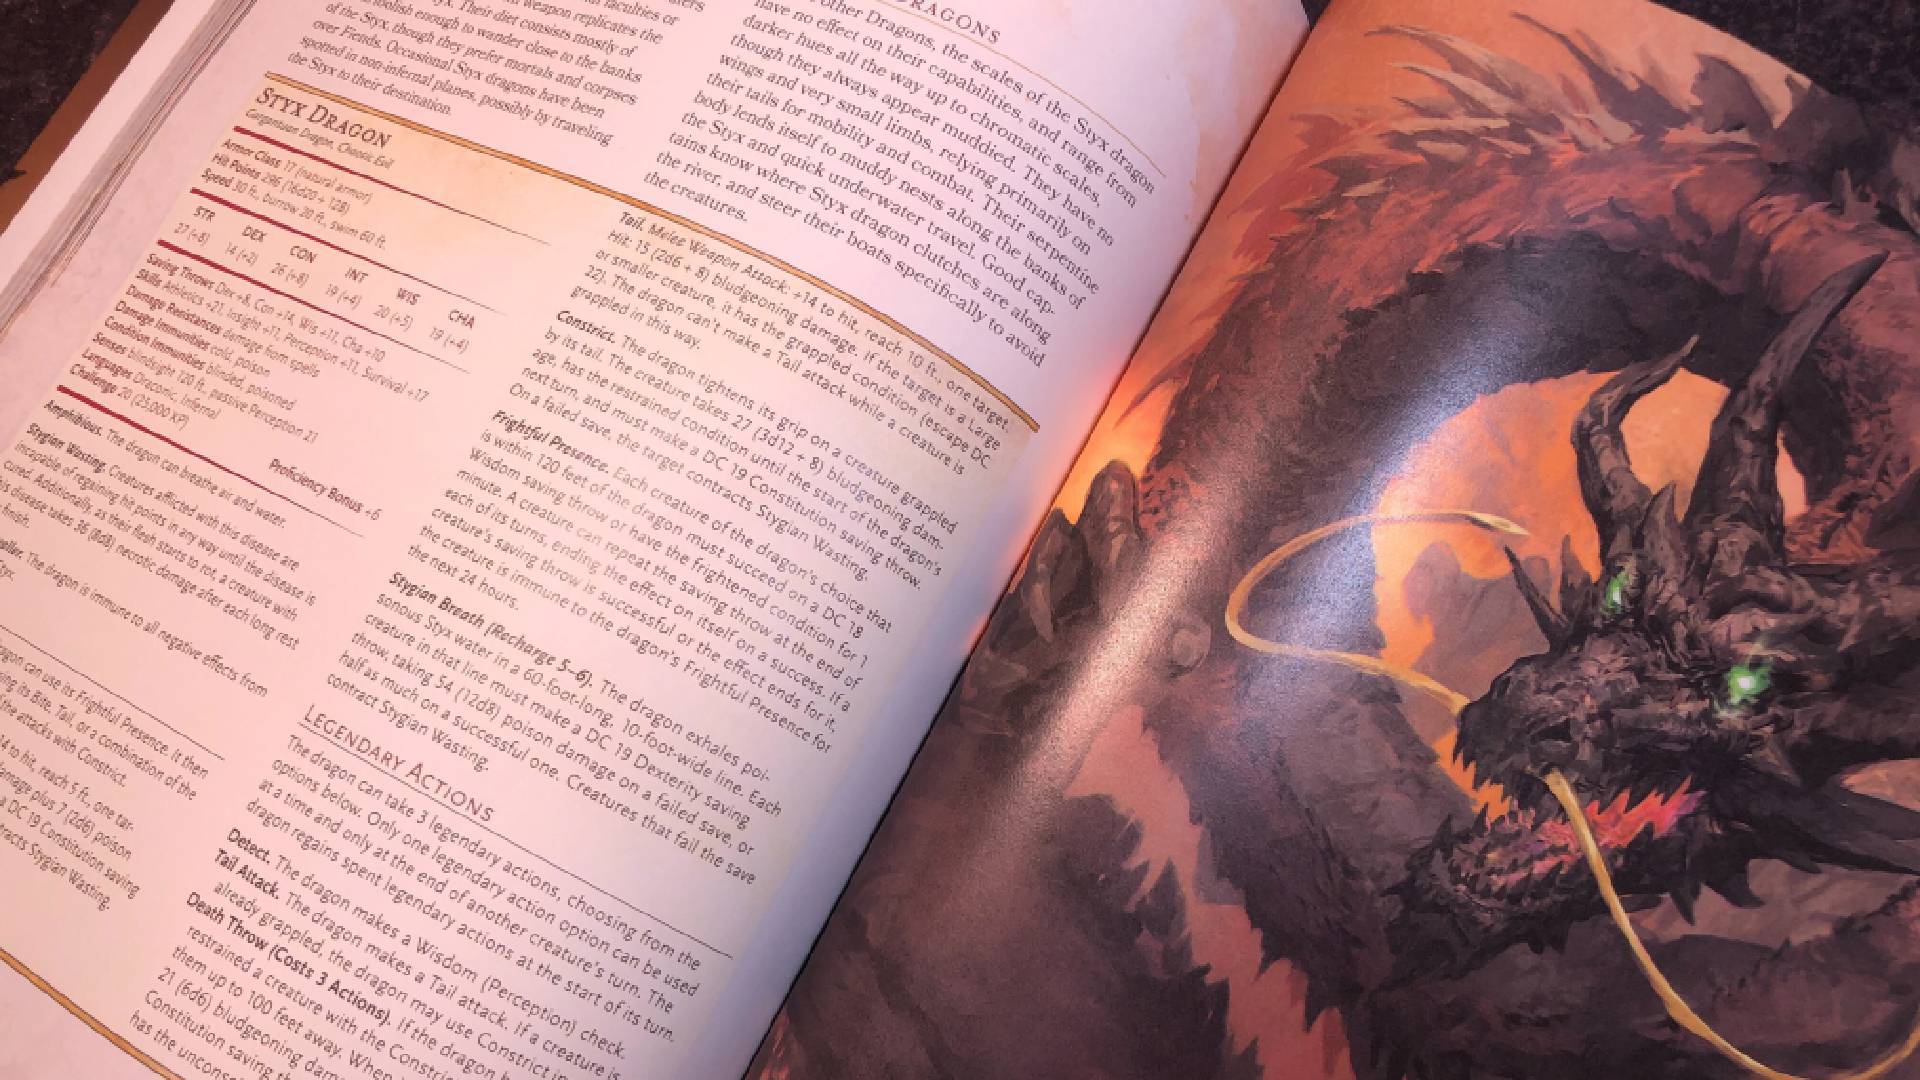 Open pages from Chains of Asmodeus, including an illustration of a dragon